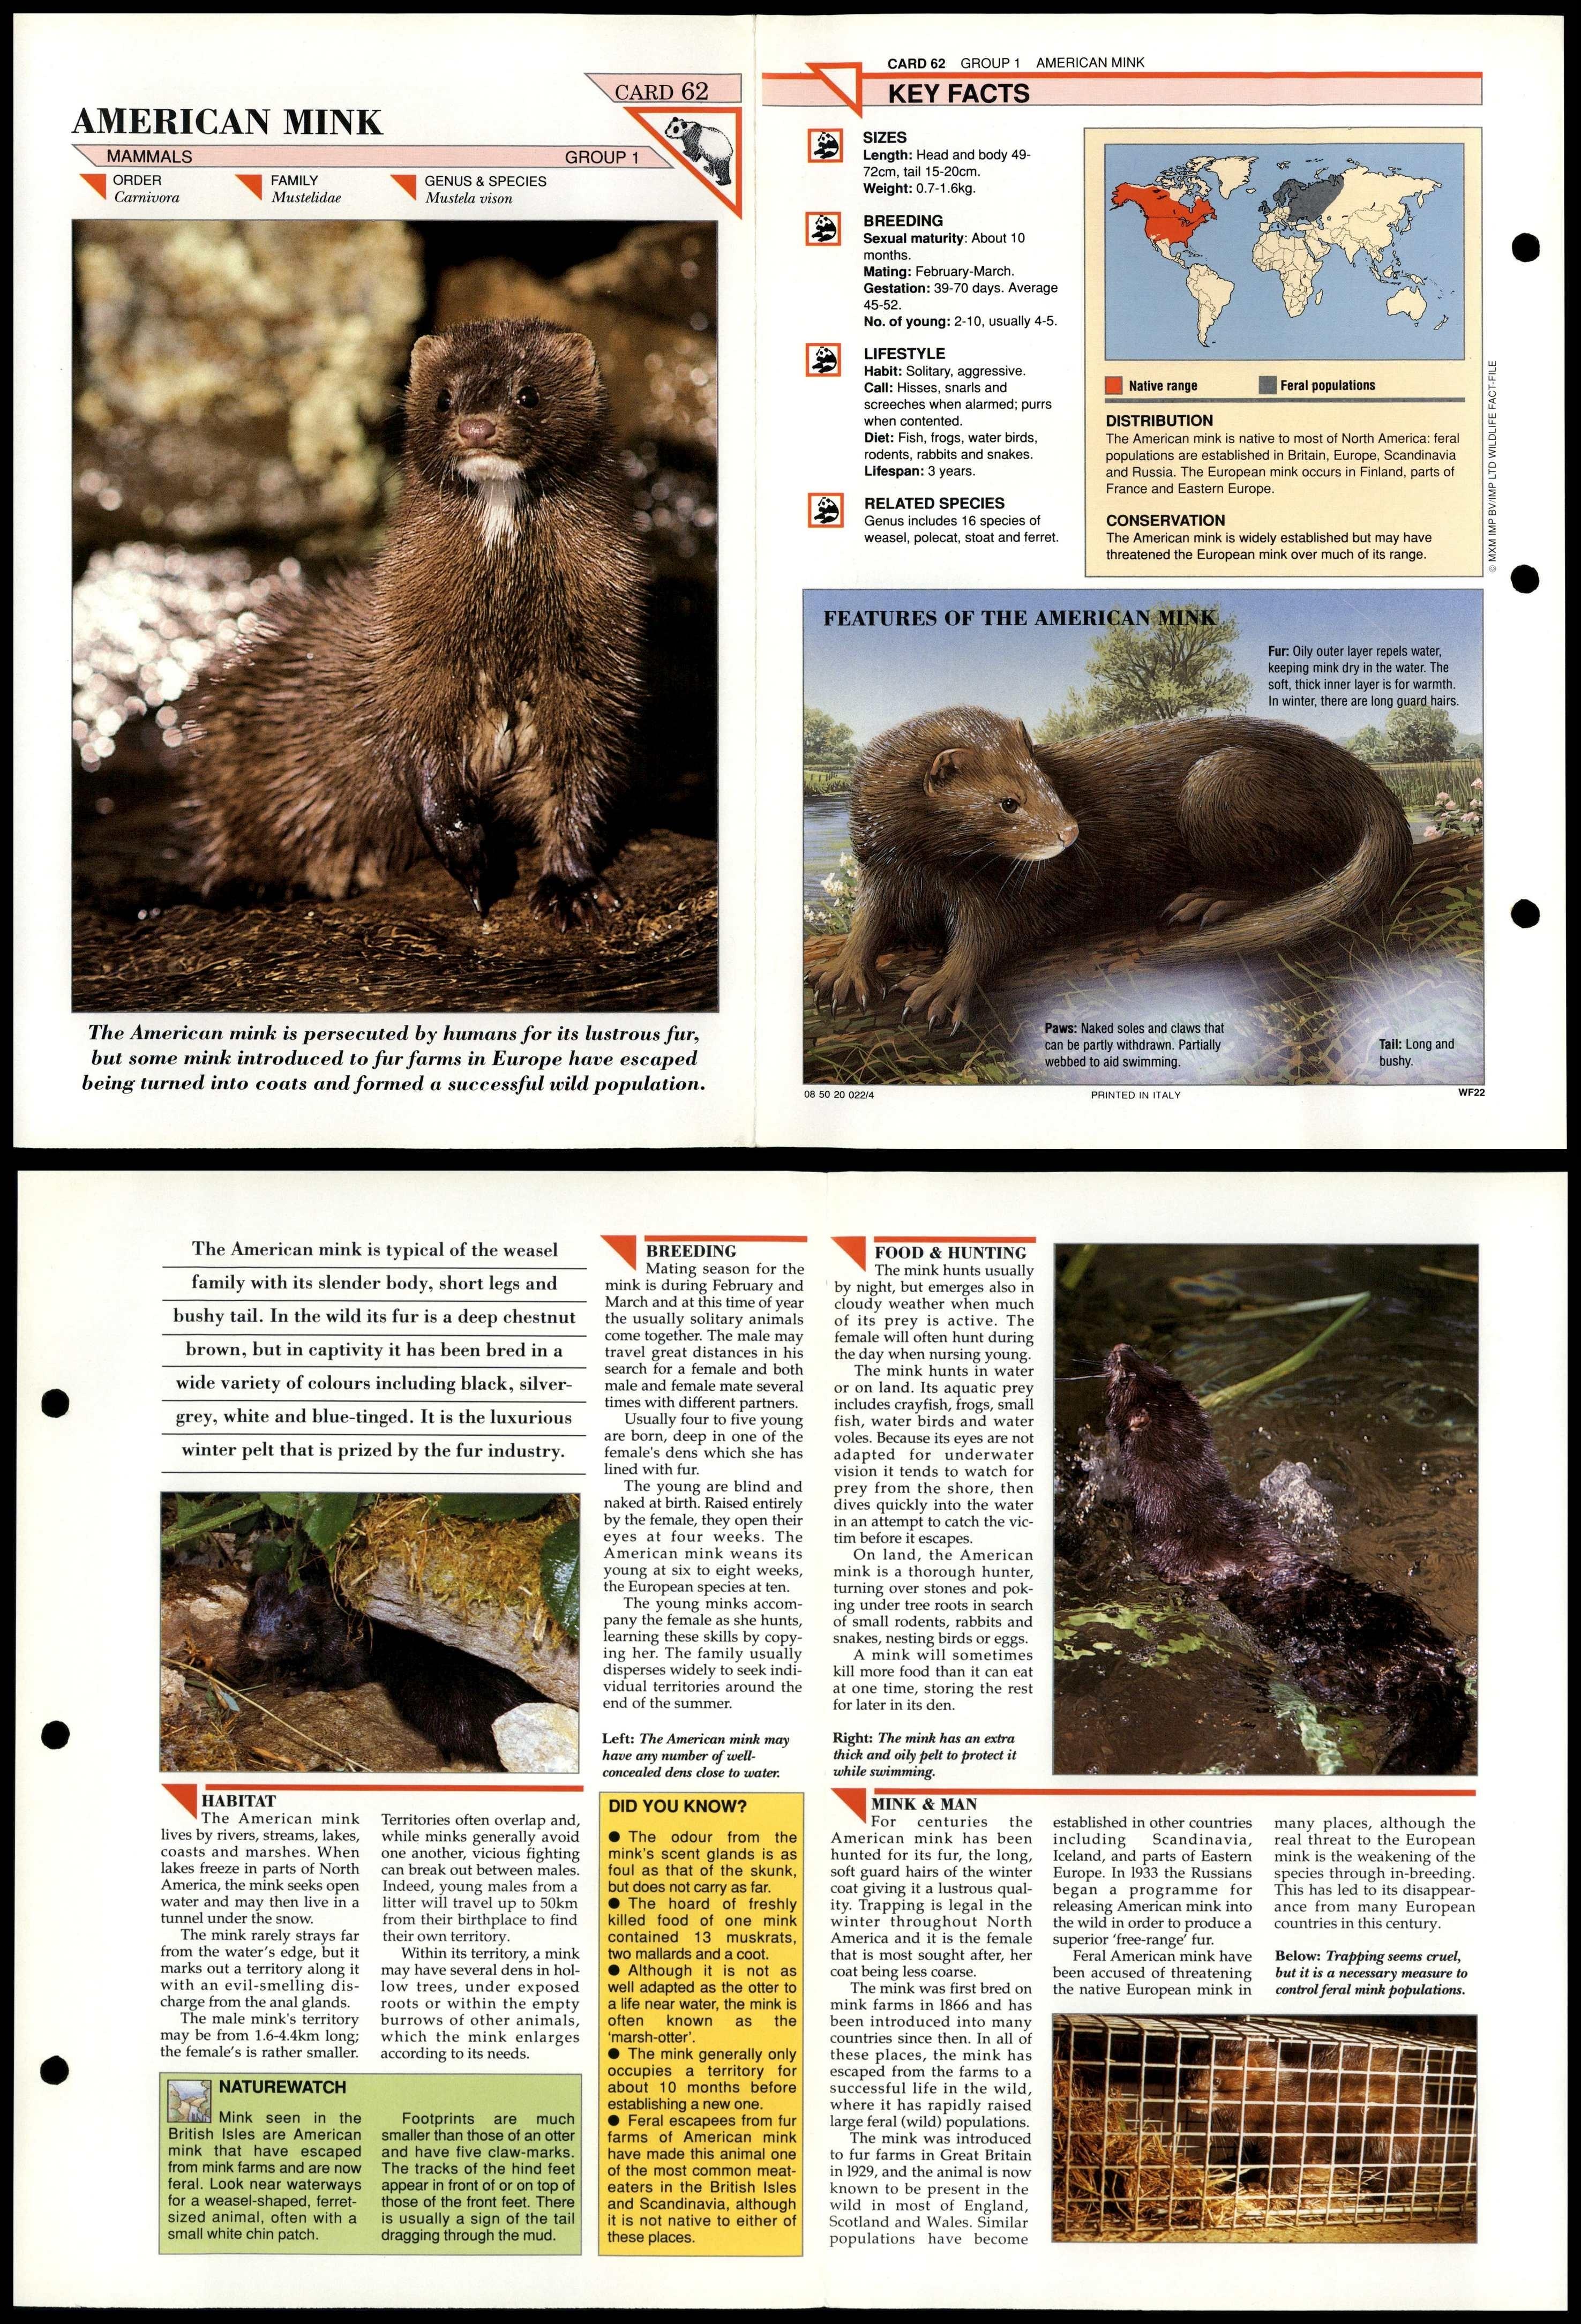 American Mink #62 Mammals Wildlife Fact File Fold-Out Card